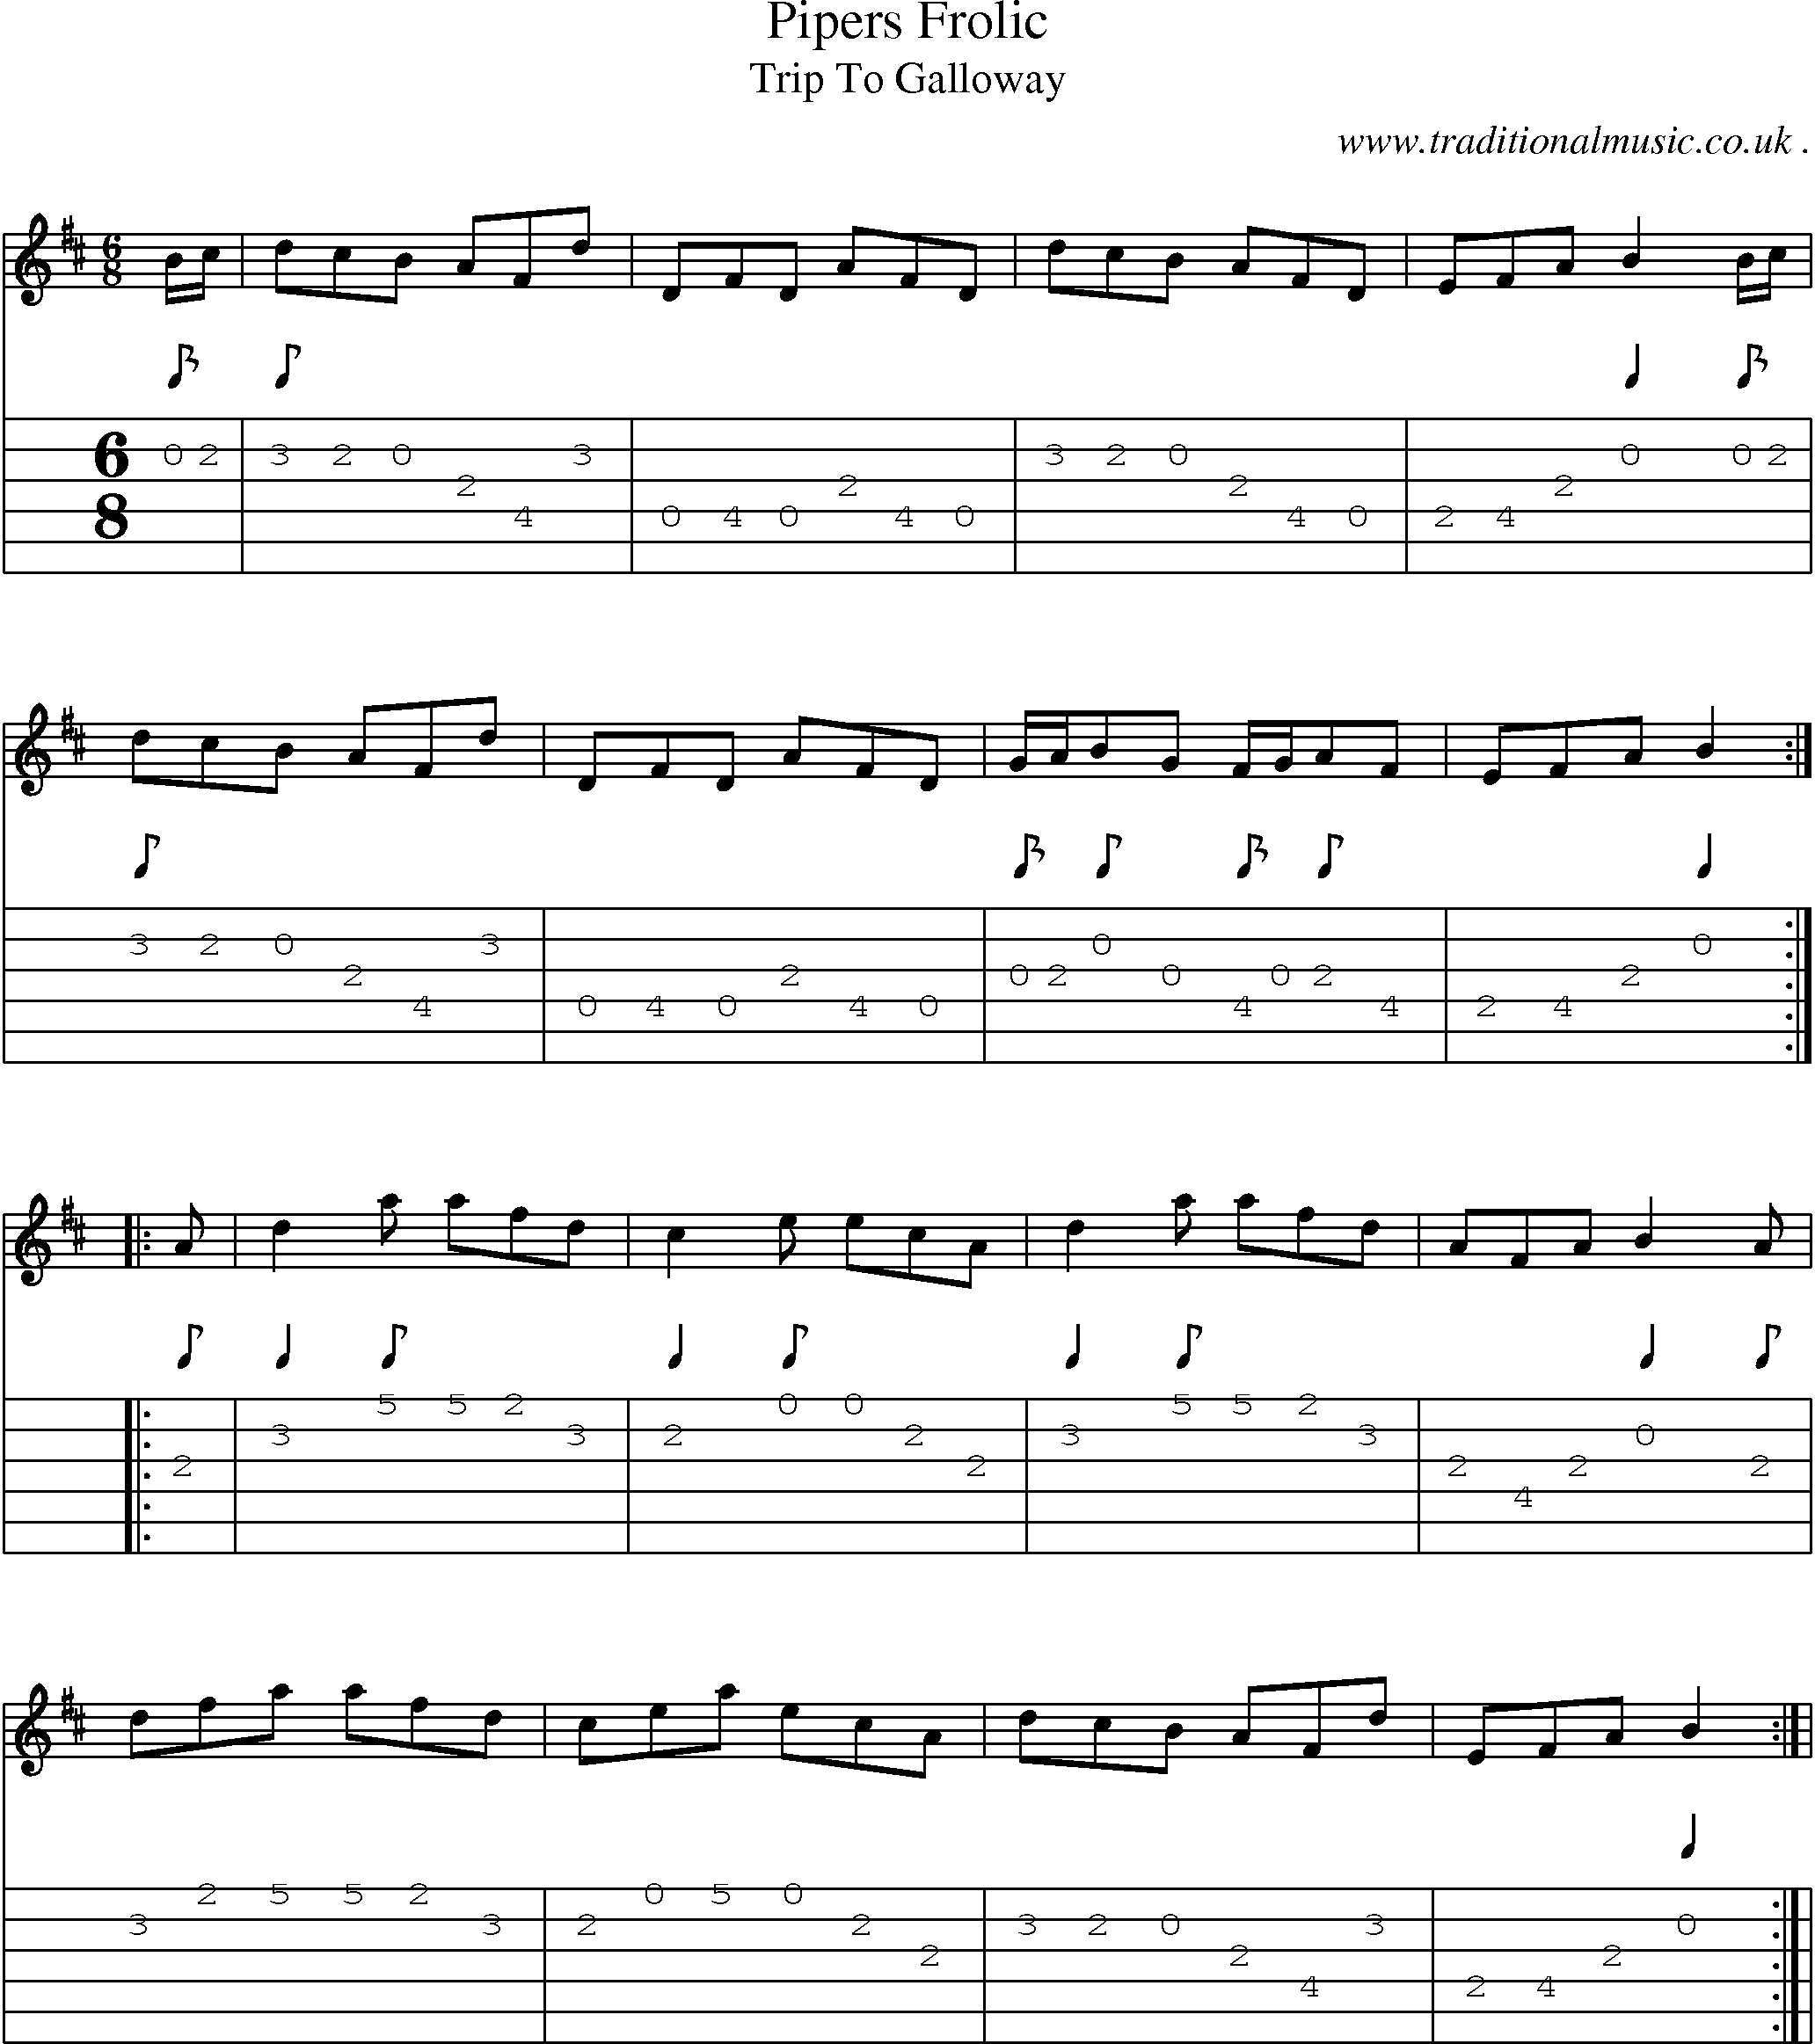 Sheet-Music and Guitar Tabs for Pipers Frolic